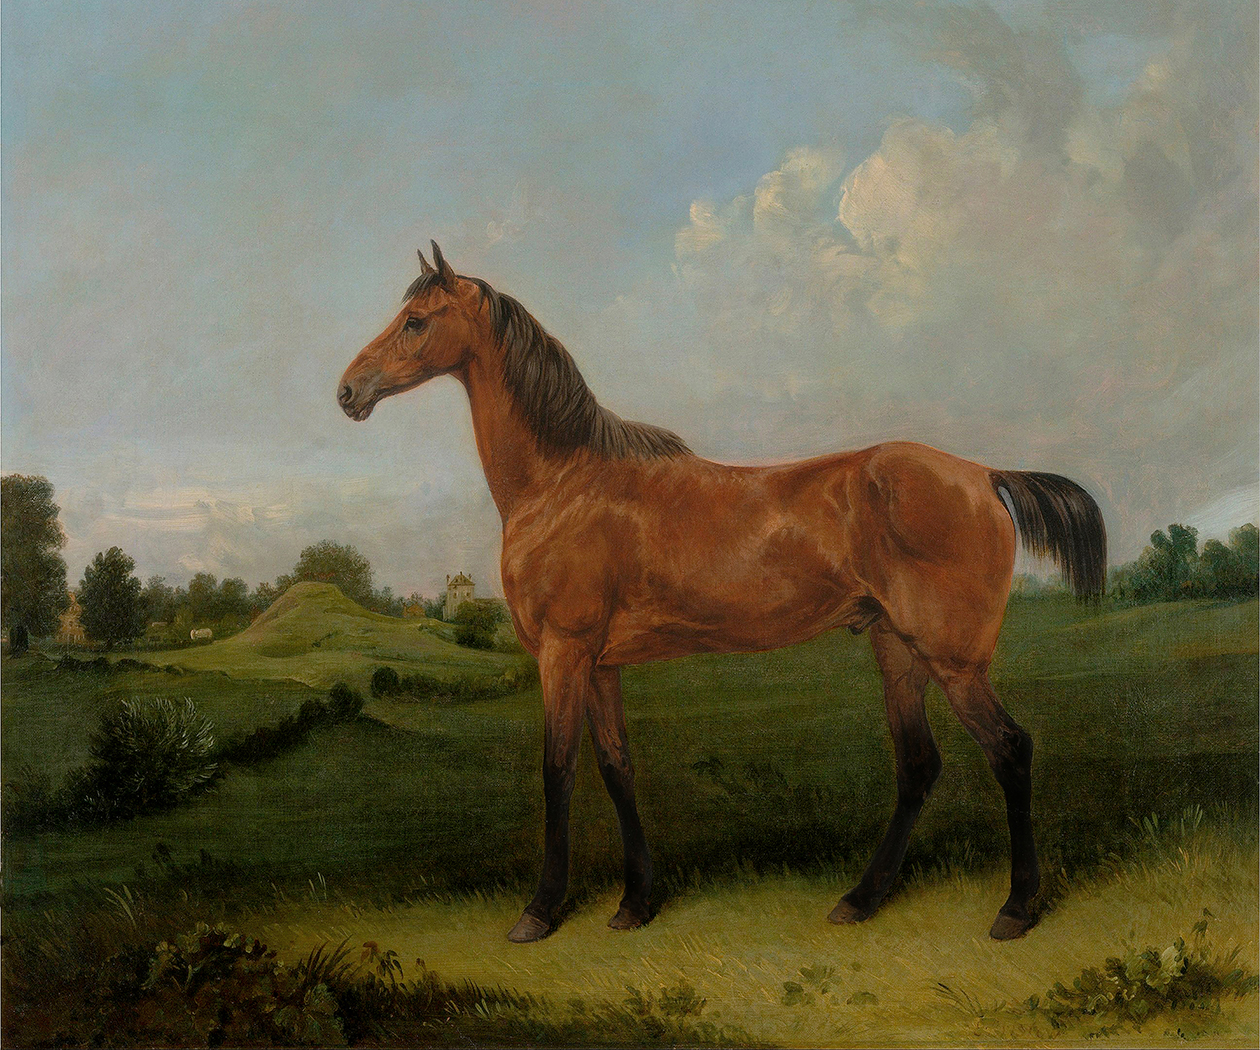 Cabin/Lodge Lodge Bay Horse in a Field Oil Painting Prin ...